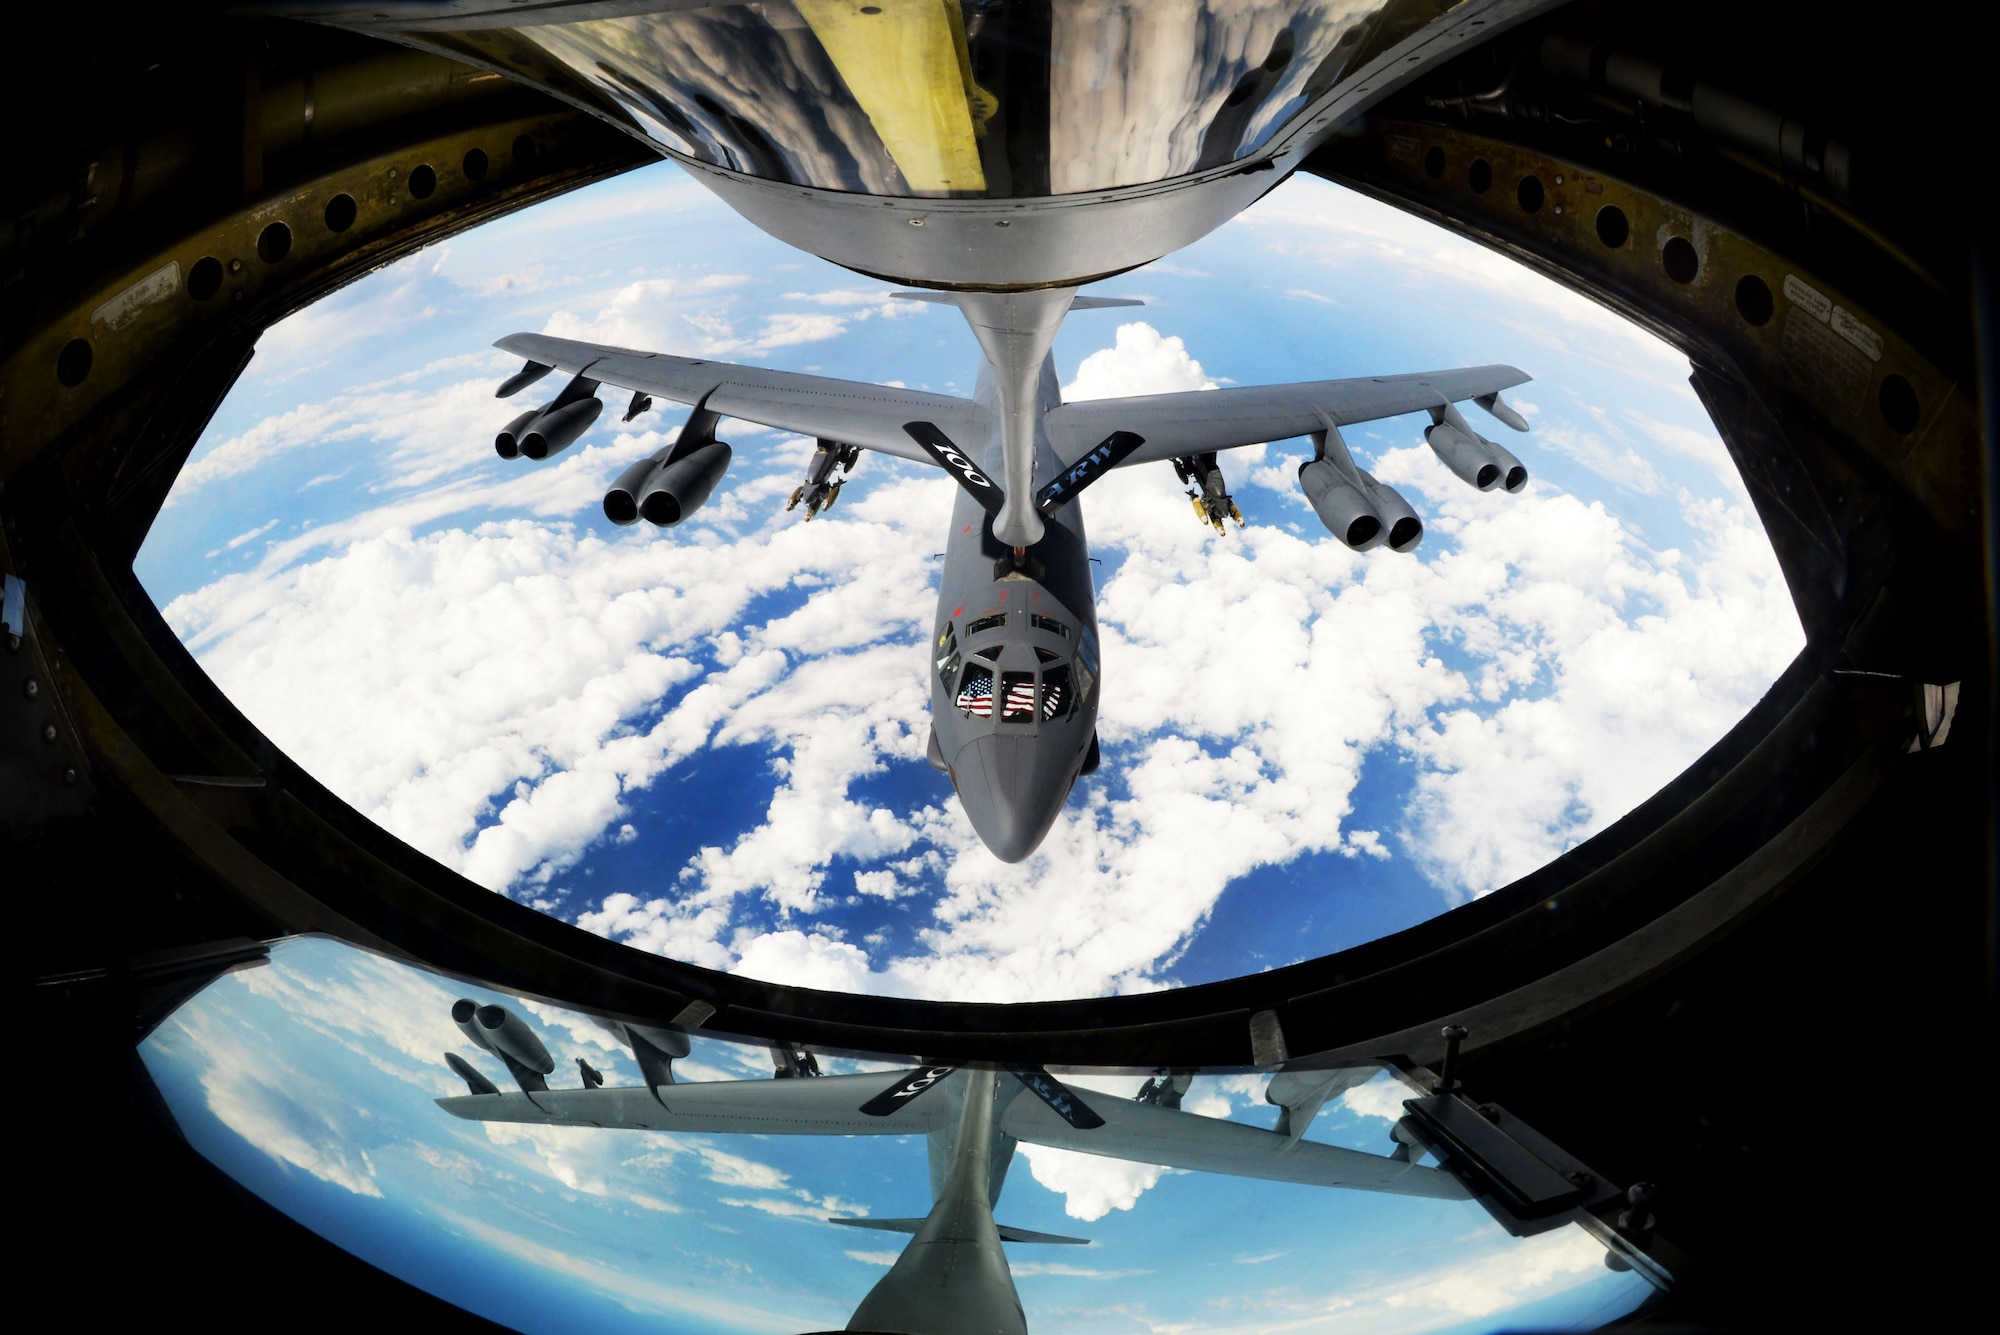 A B-52 Stratofortress from Barksdale Air Force Base, La., receives fuel from a KC-135 Stratotanker from RAF Mildenhall, England, above the Mediterranean Sea, Sept. 27, 2017. The B-52 is a long-range, heavy bomber that can perform a variety of missions. During this flight, the KC-135 offloaded 55,000 pounds of fuel to the B-52. (U.S. Air Force photo by Senior Airman Tenley Long)